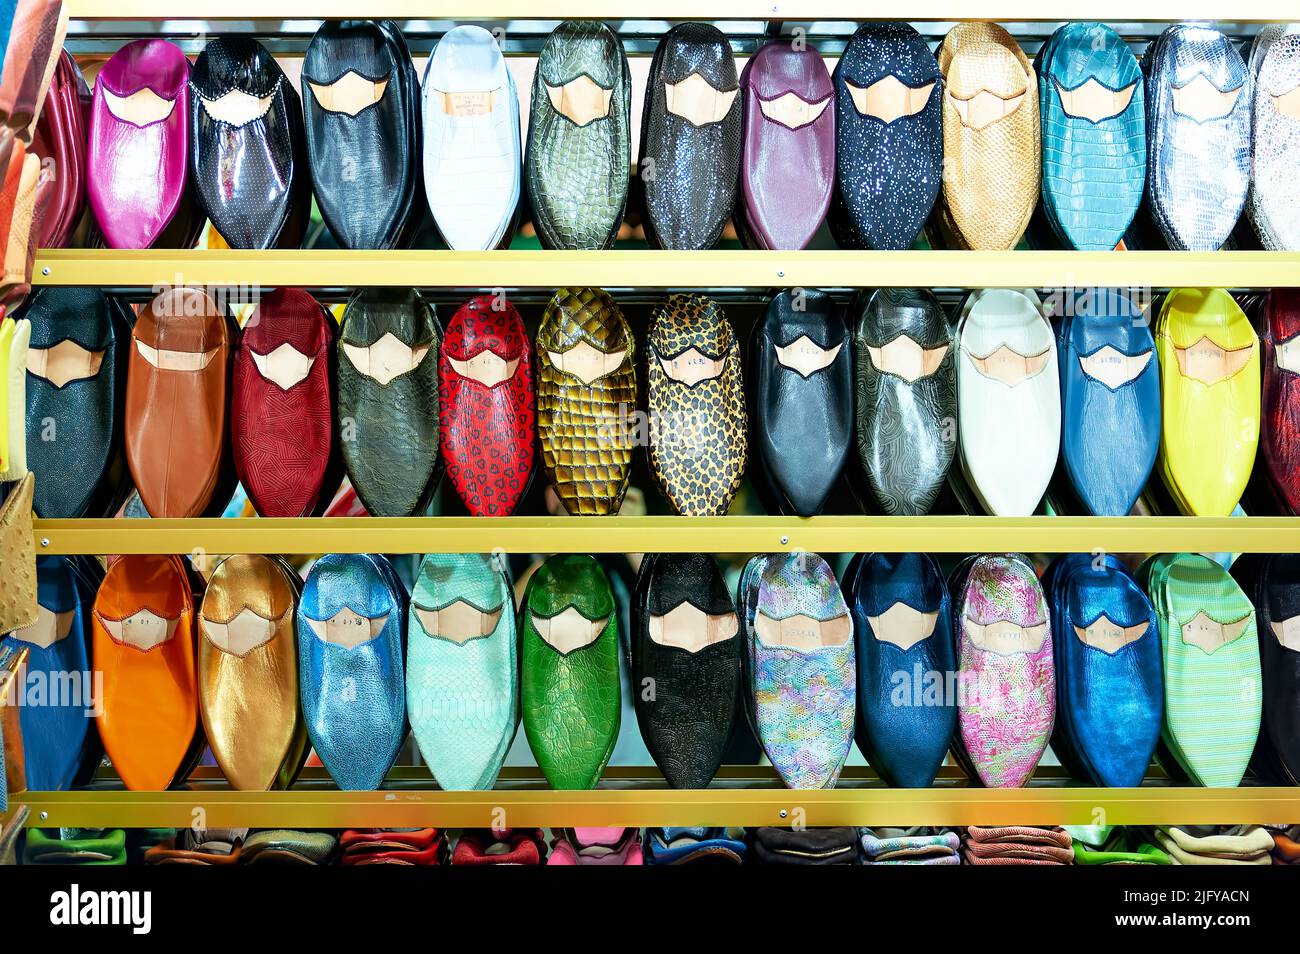 Morocco Marrakesh. Traditional moroccan slippers Stock Photo